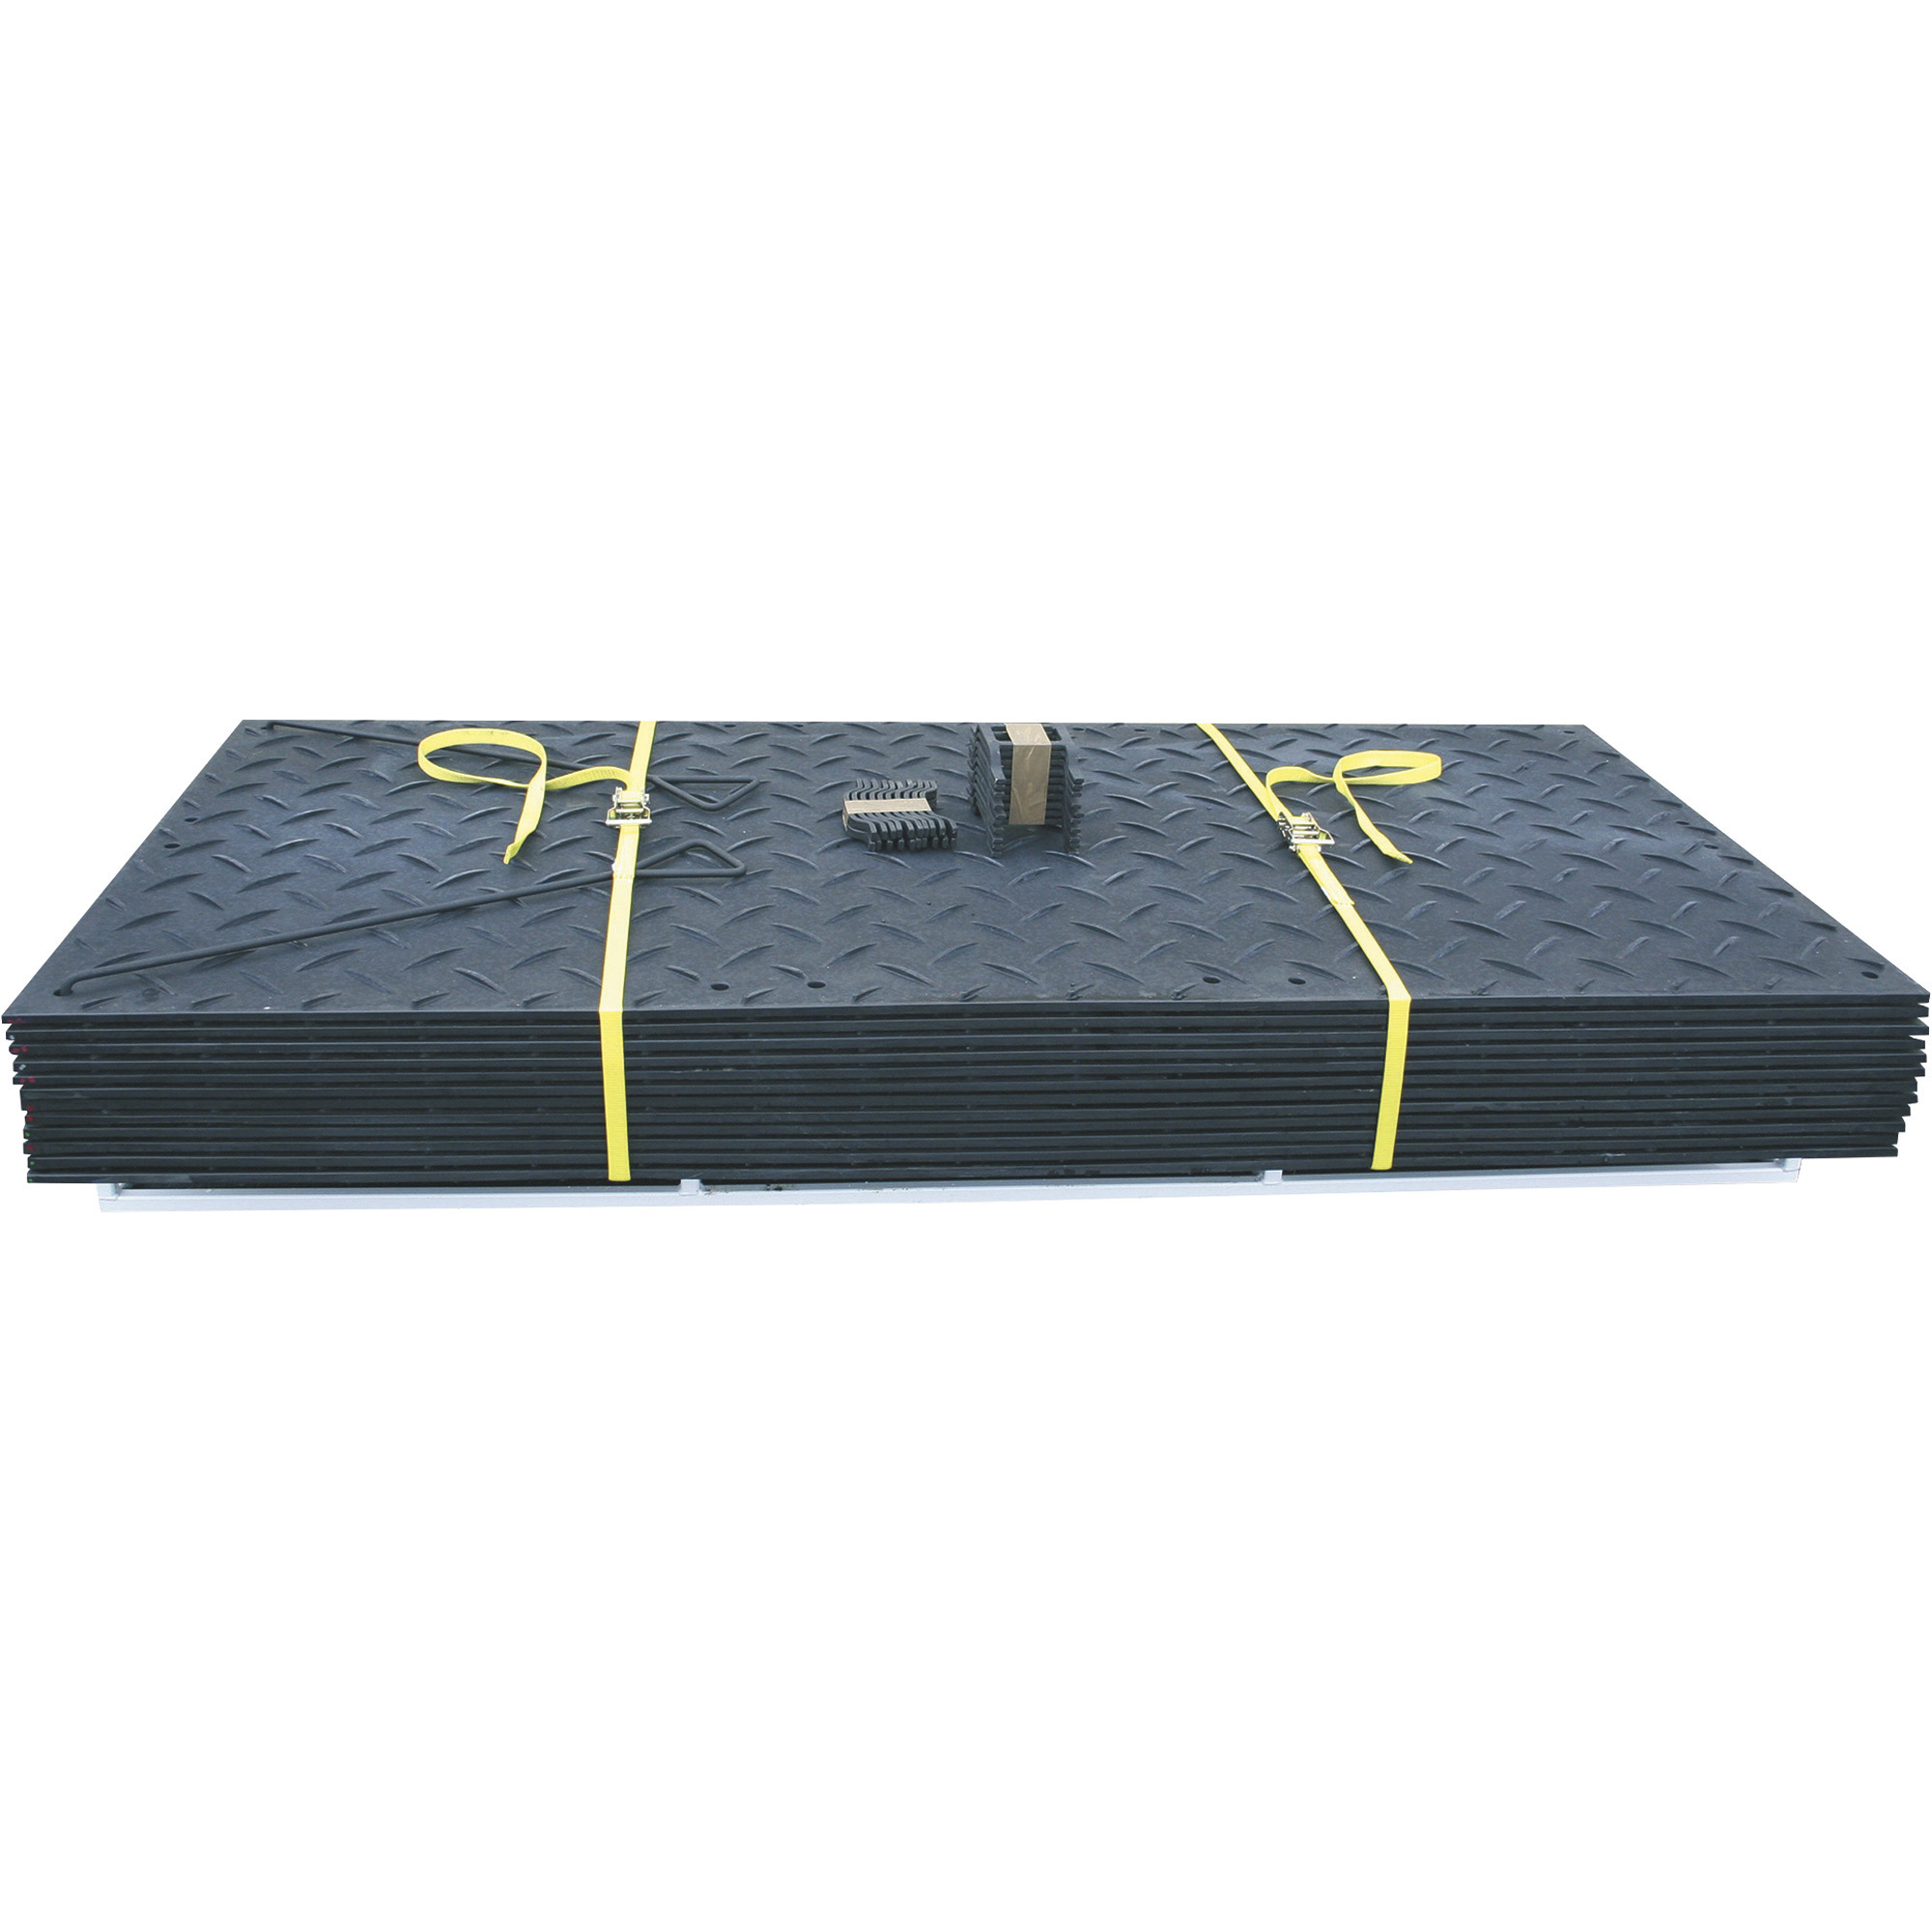 Checkers Ground Protection Mat Pak â 12-Piece Set, Black, 8ft.L x 3ft.W, Diamond Plate Tread Design, Model AMCP3